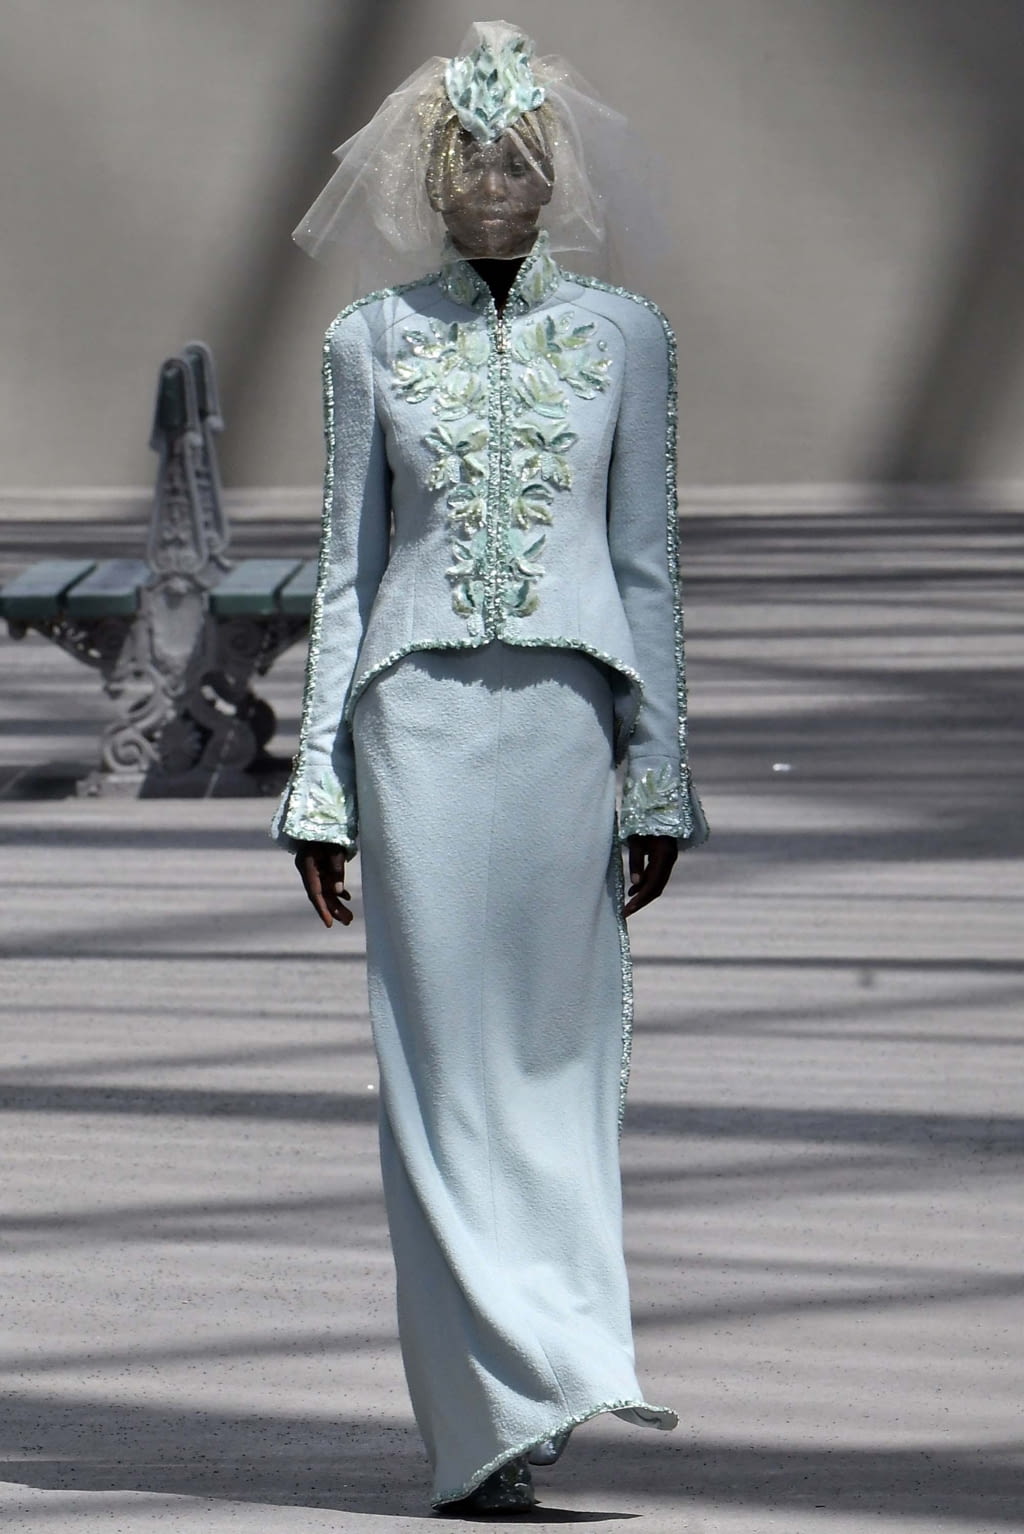 Chanel Fall 2018 Haute Couture Show Was All About Paris